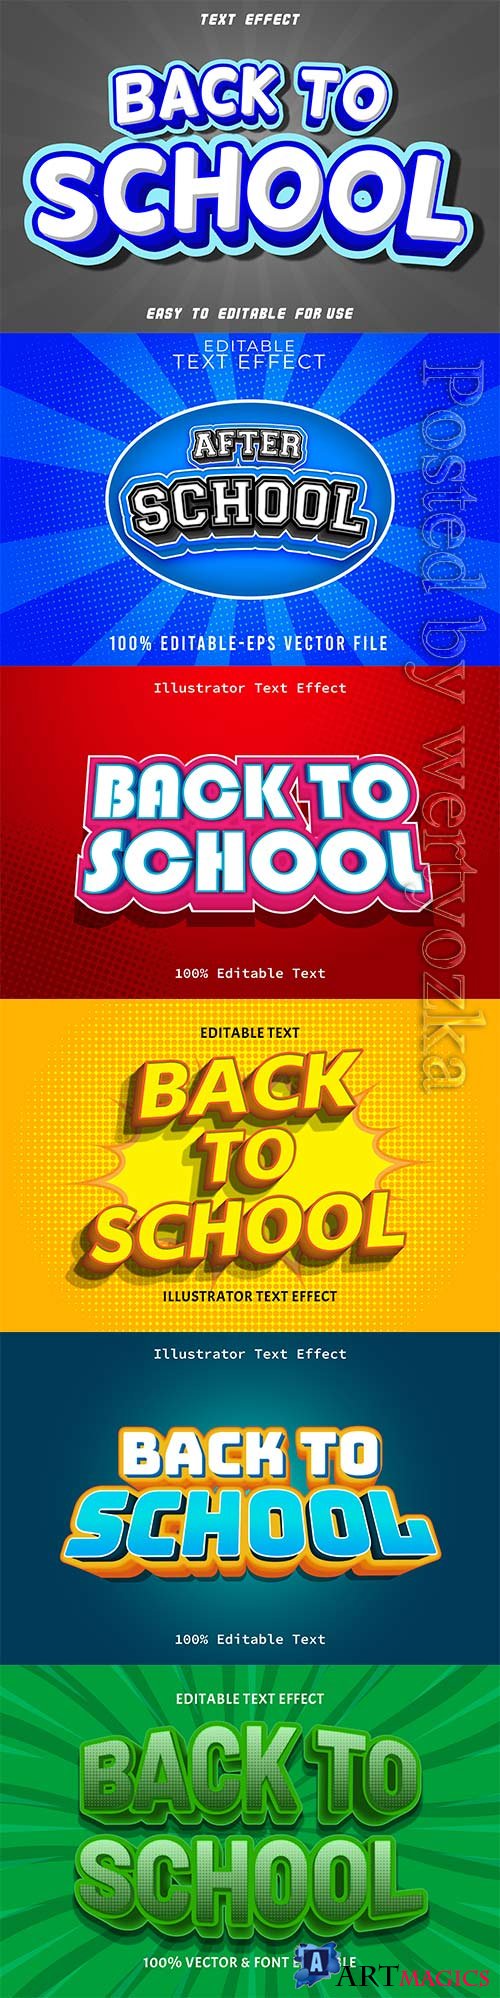 Back to school editable text effect vol 8